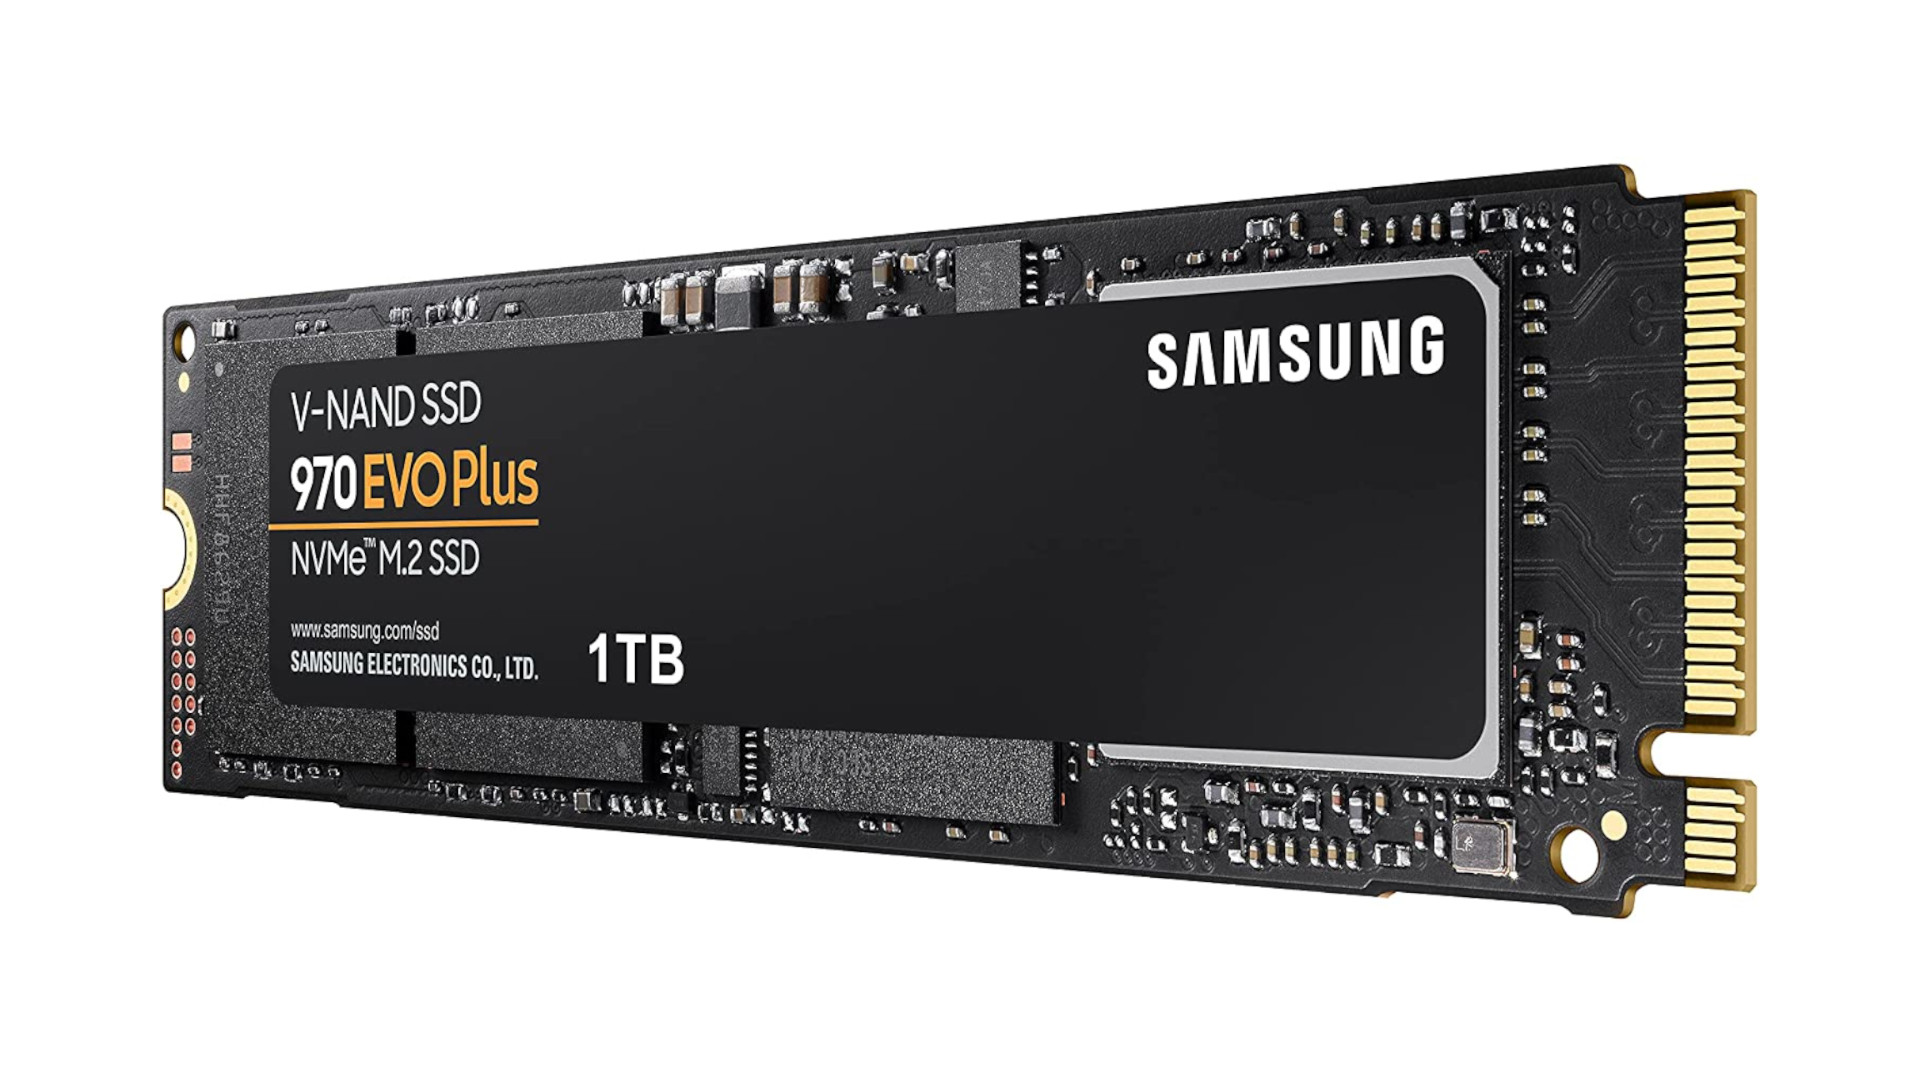 The best PCIe 3.0 SSD is the Samsung 970 EVO Plus